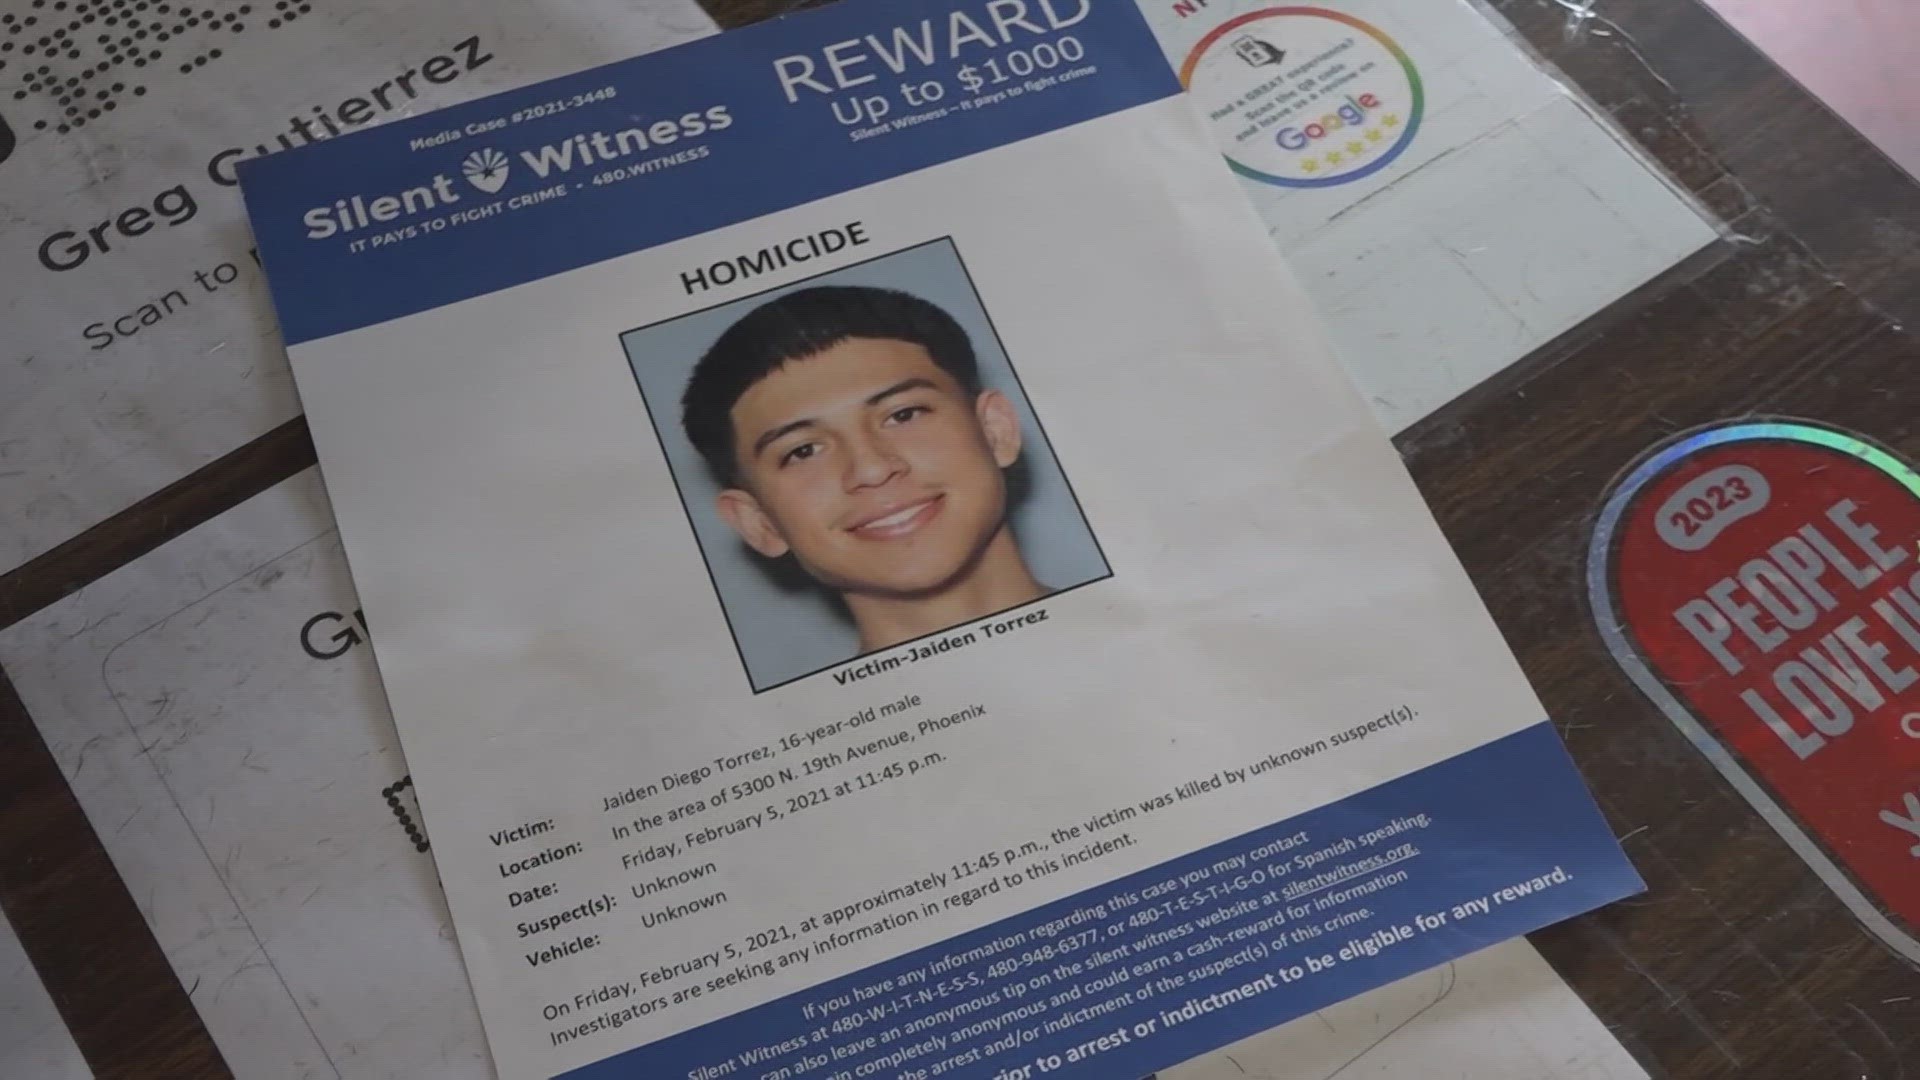 Greg Gutierrez's son was shot and killed nearly 3 years ago and has yet to be solved.